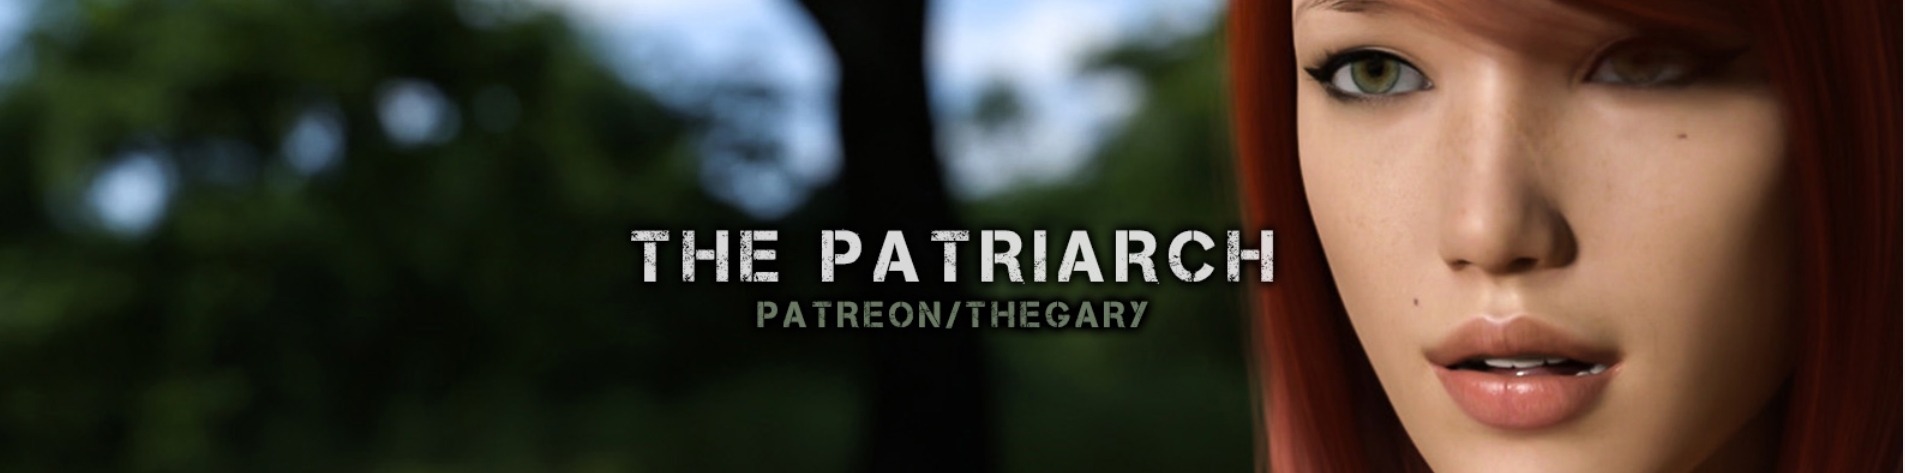 The Patriarch poster